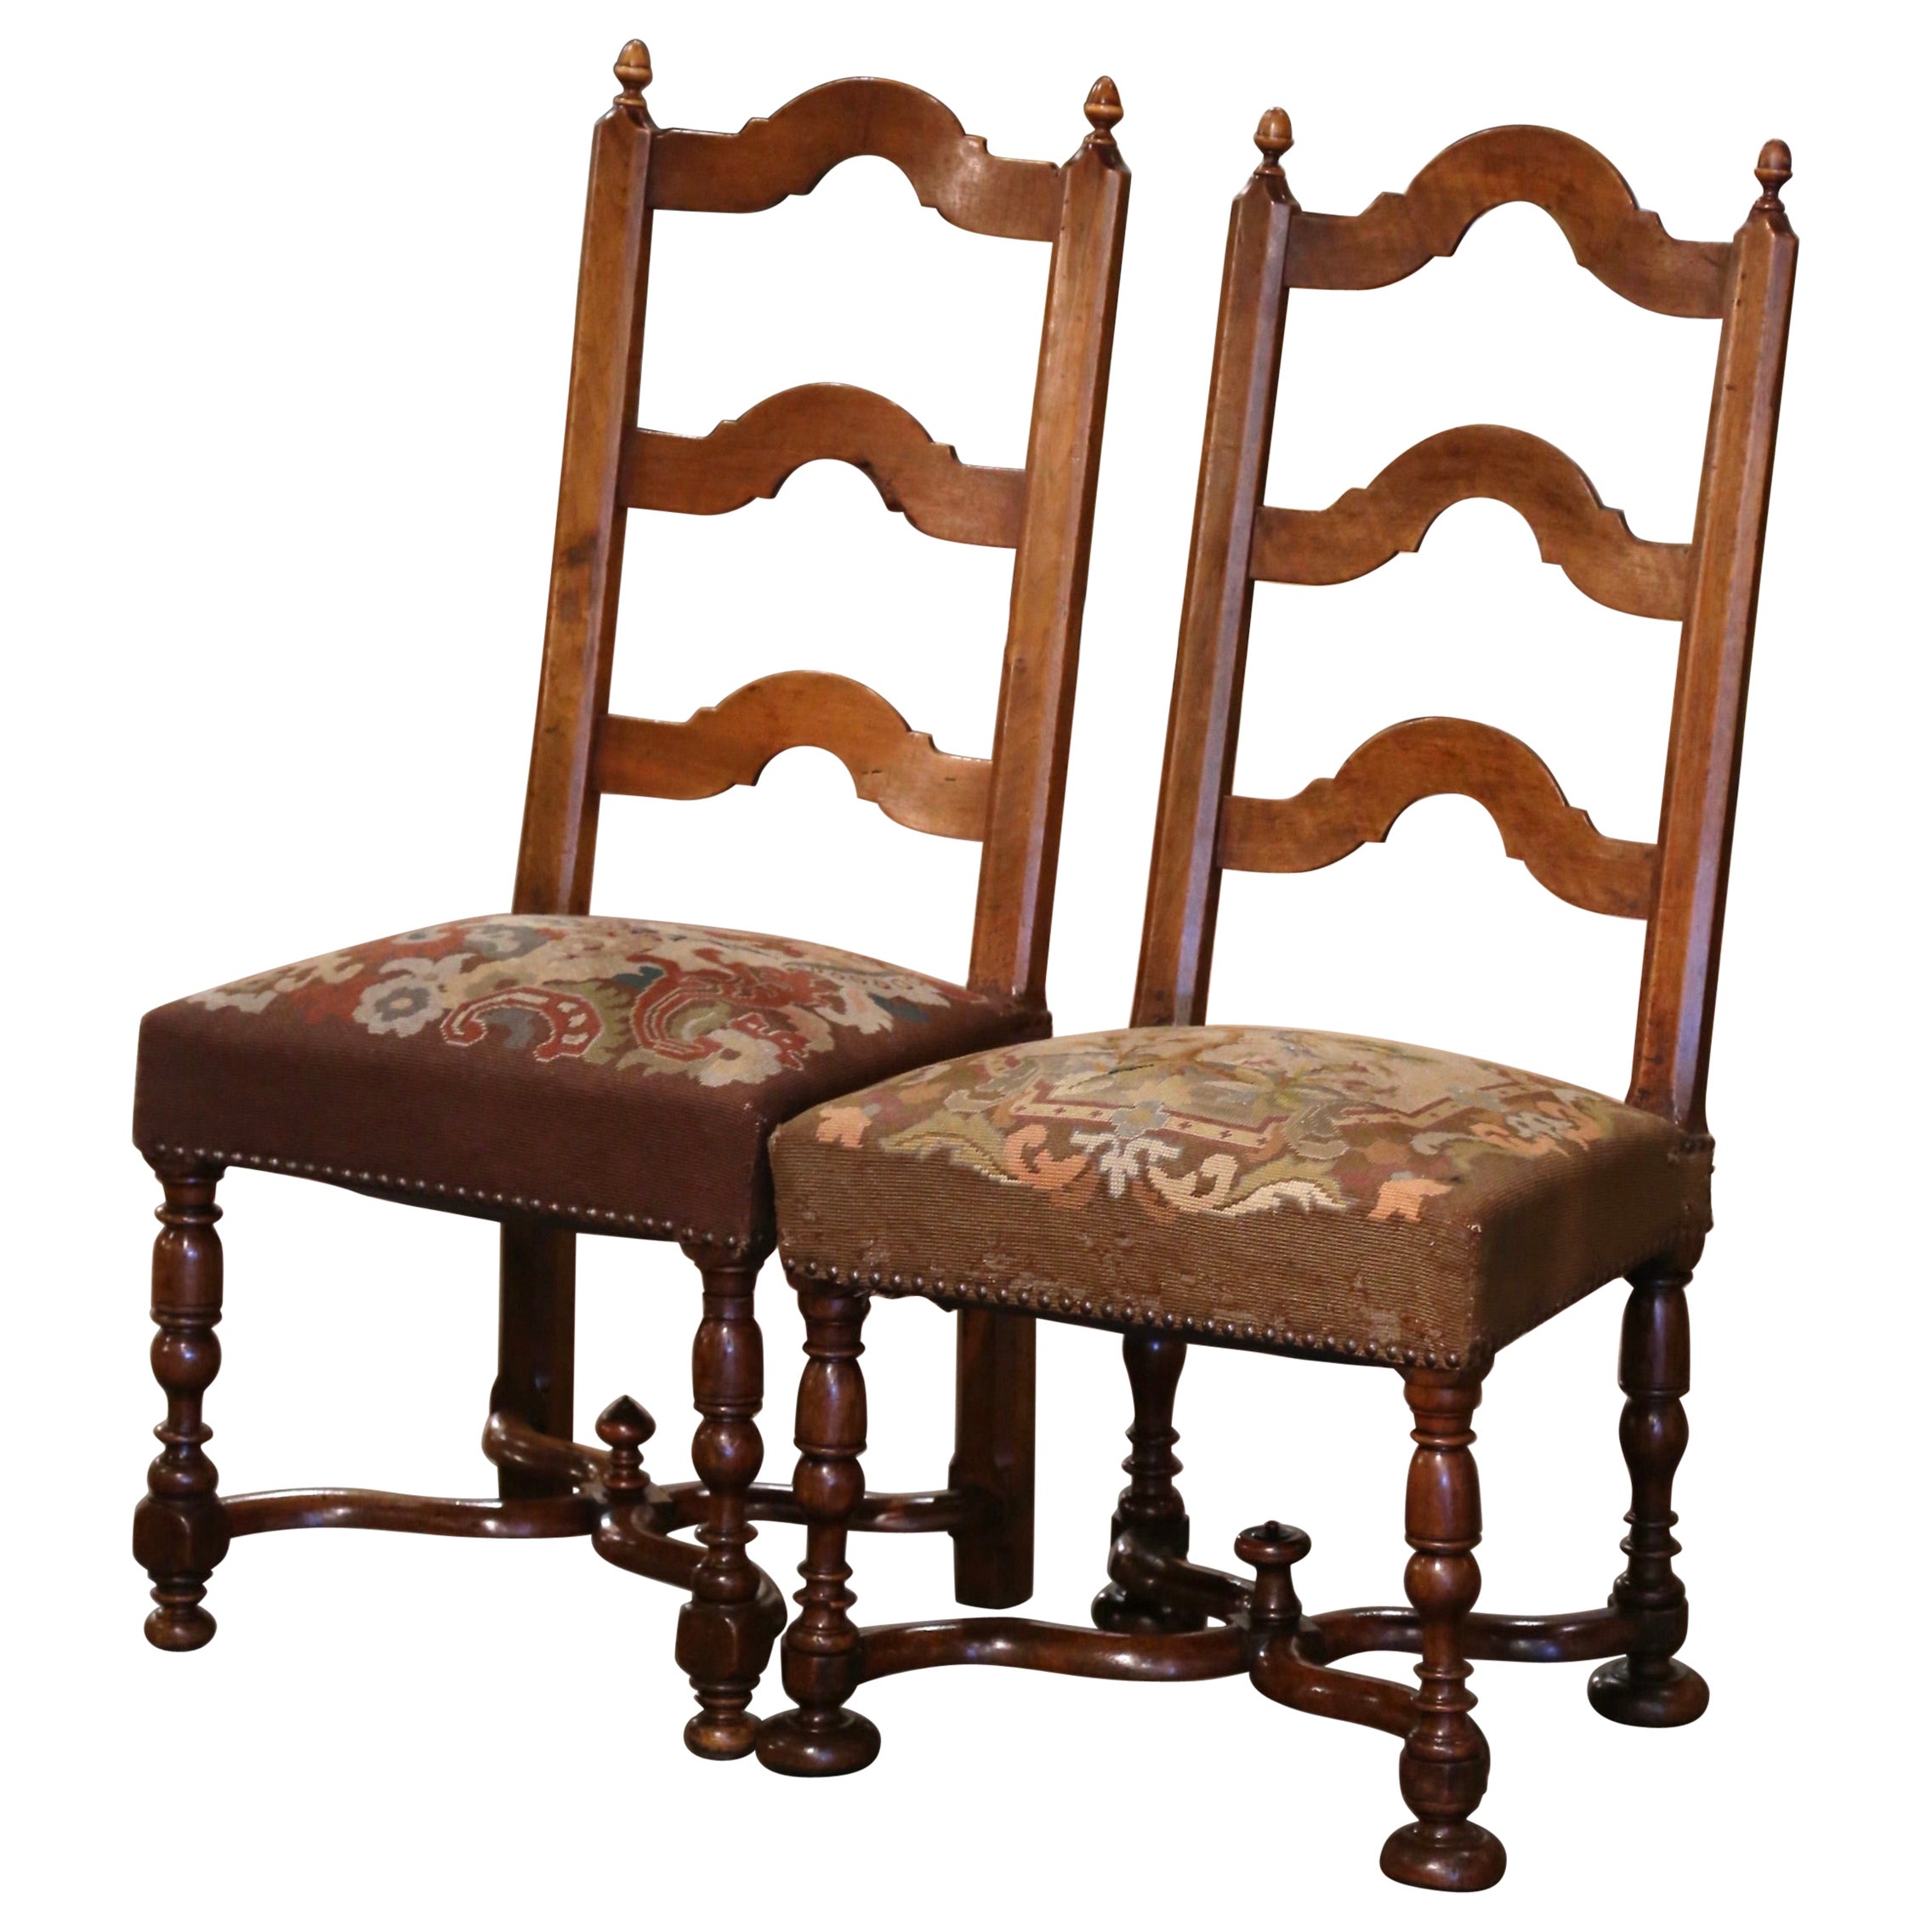 Pair of 19th Century French Carved Walnut Chairs with Needlepoint Upholstery